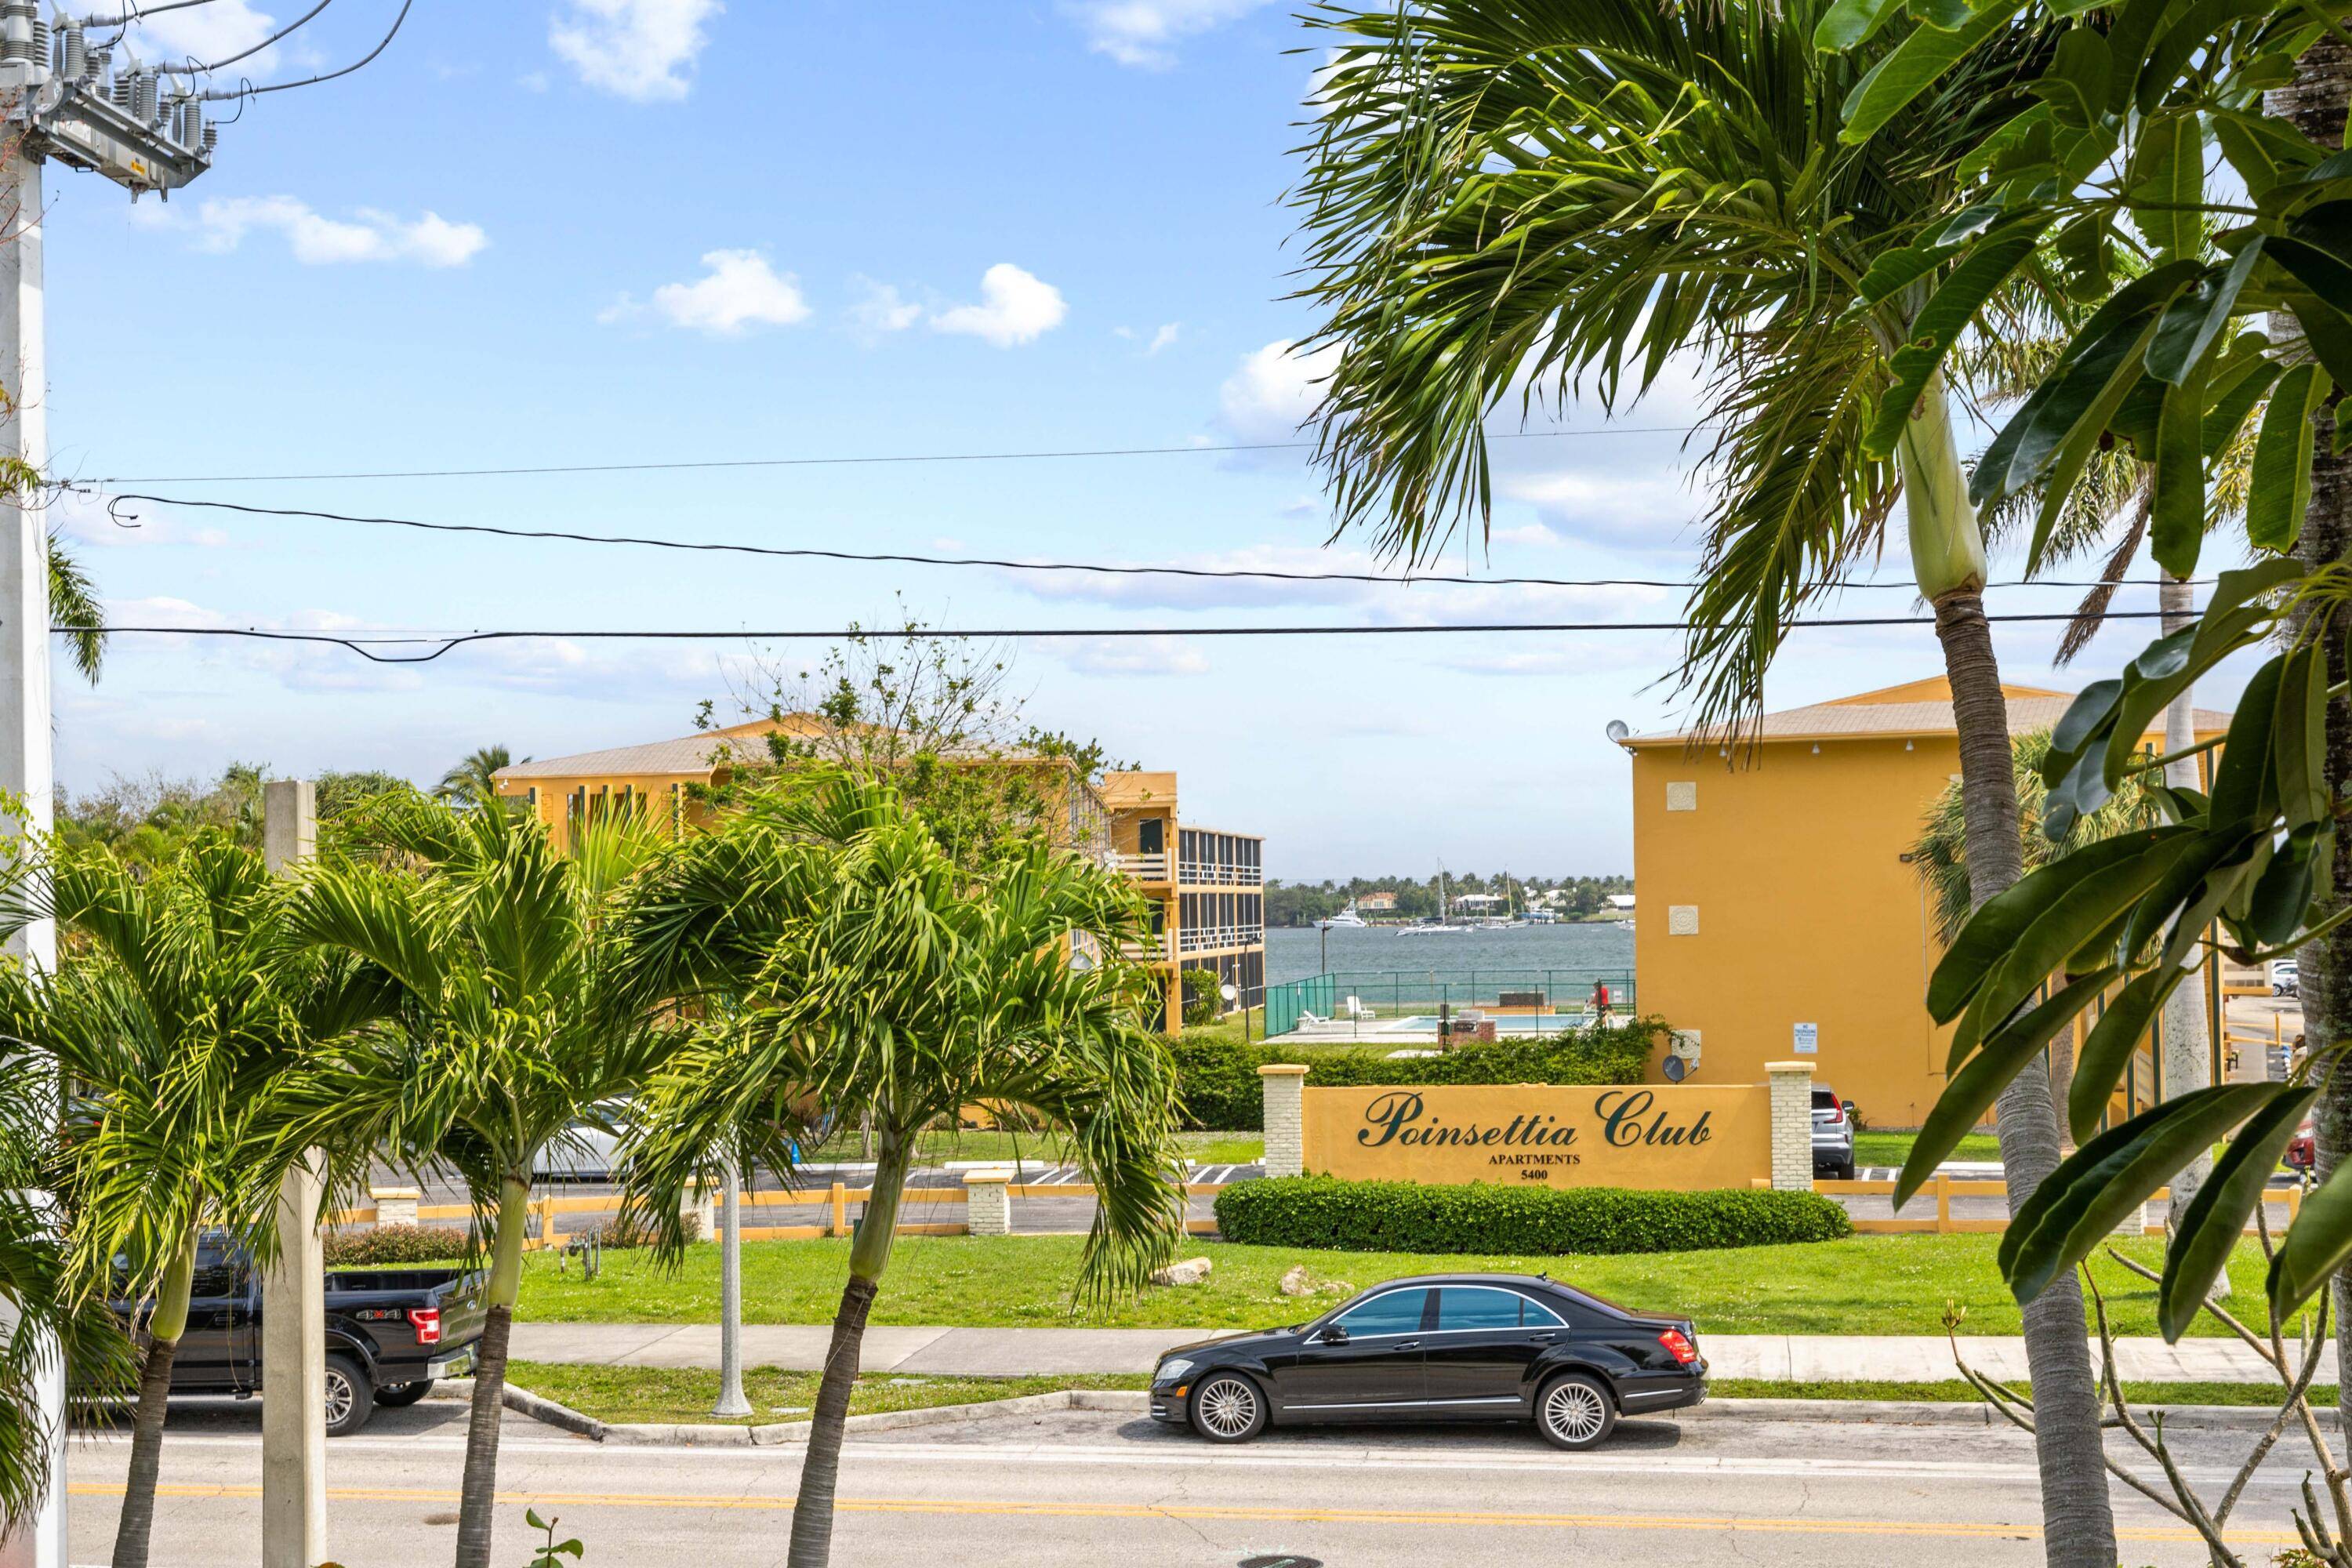 Dazzling Intracoastal Water Views from your large private balcony and bedroom in this second story North Flagler oasis.